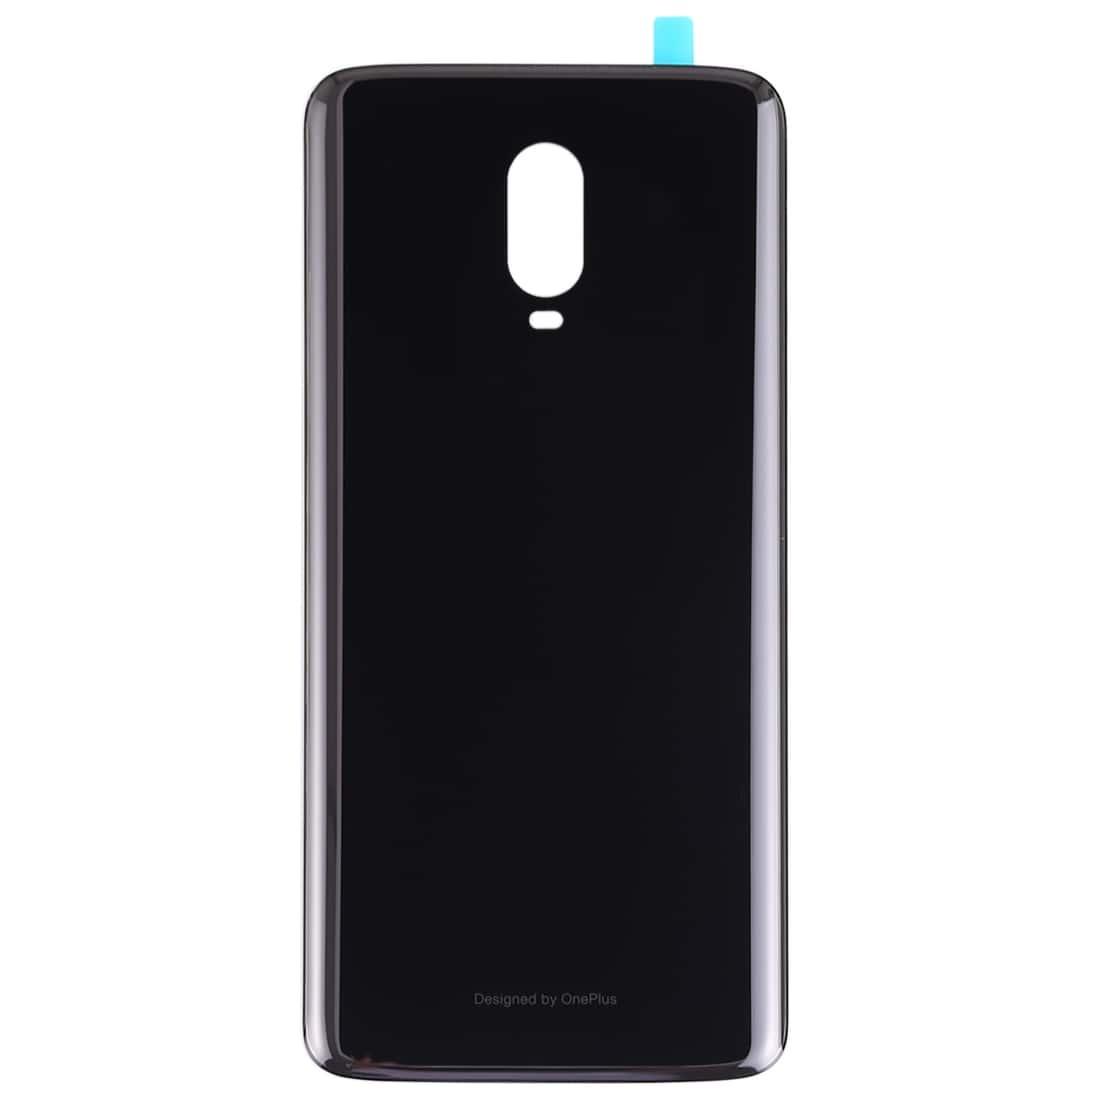 Back Glass Panel for  Oneplus 6T Black